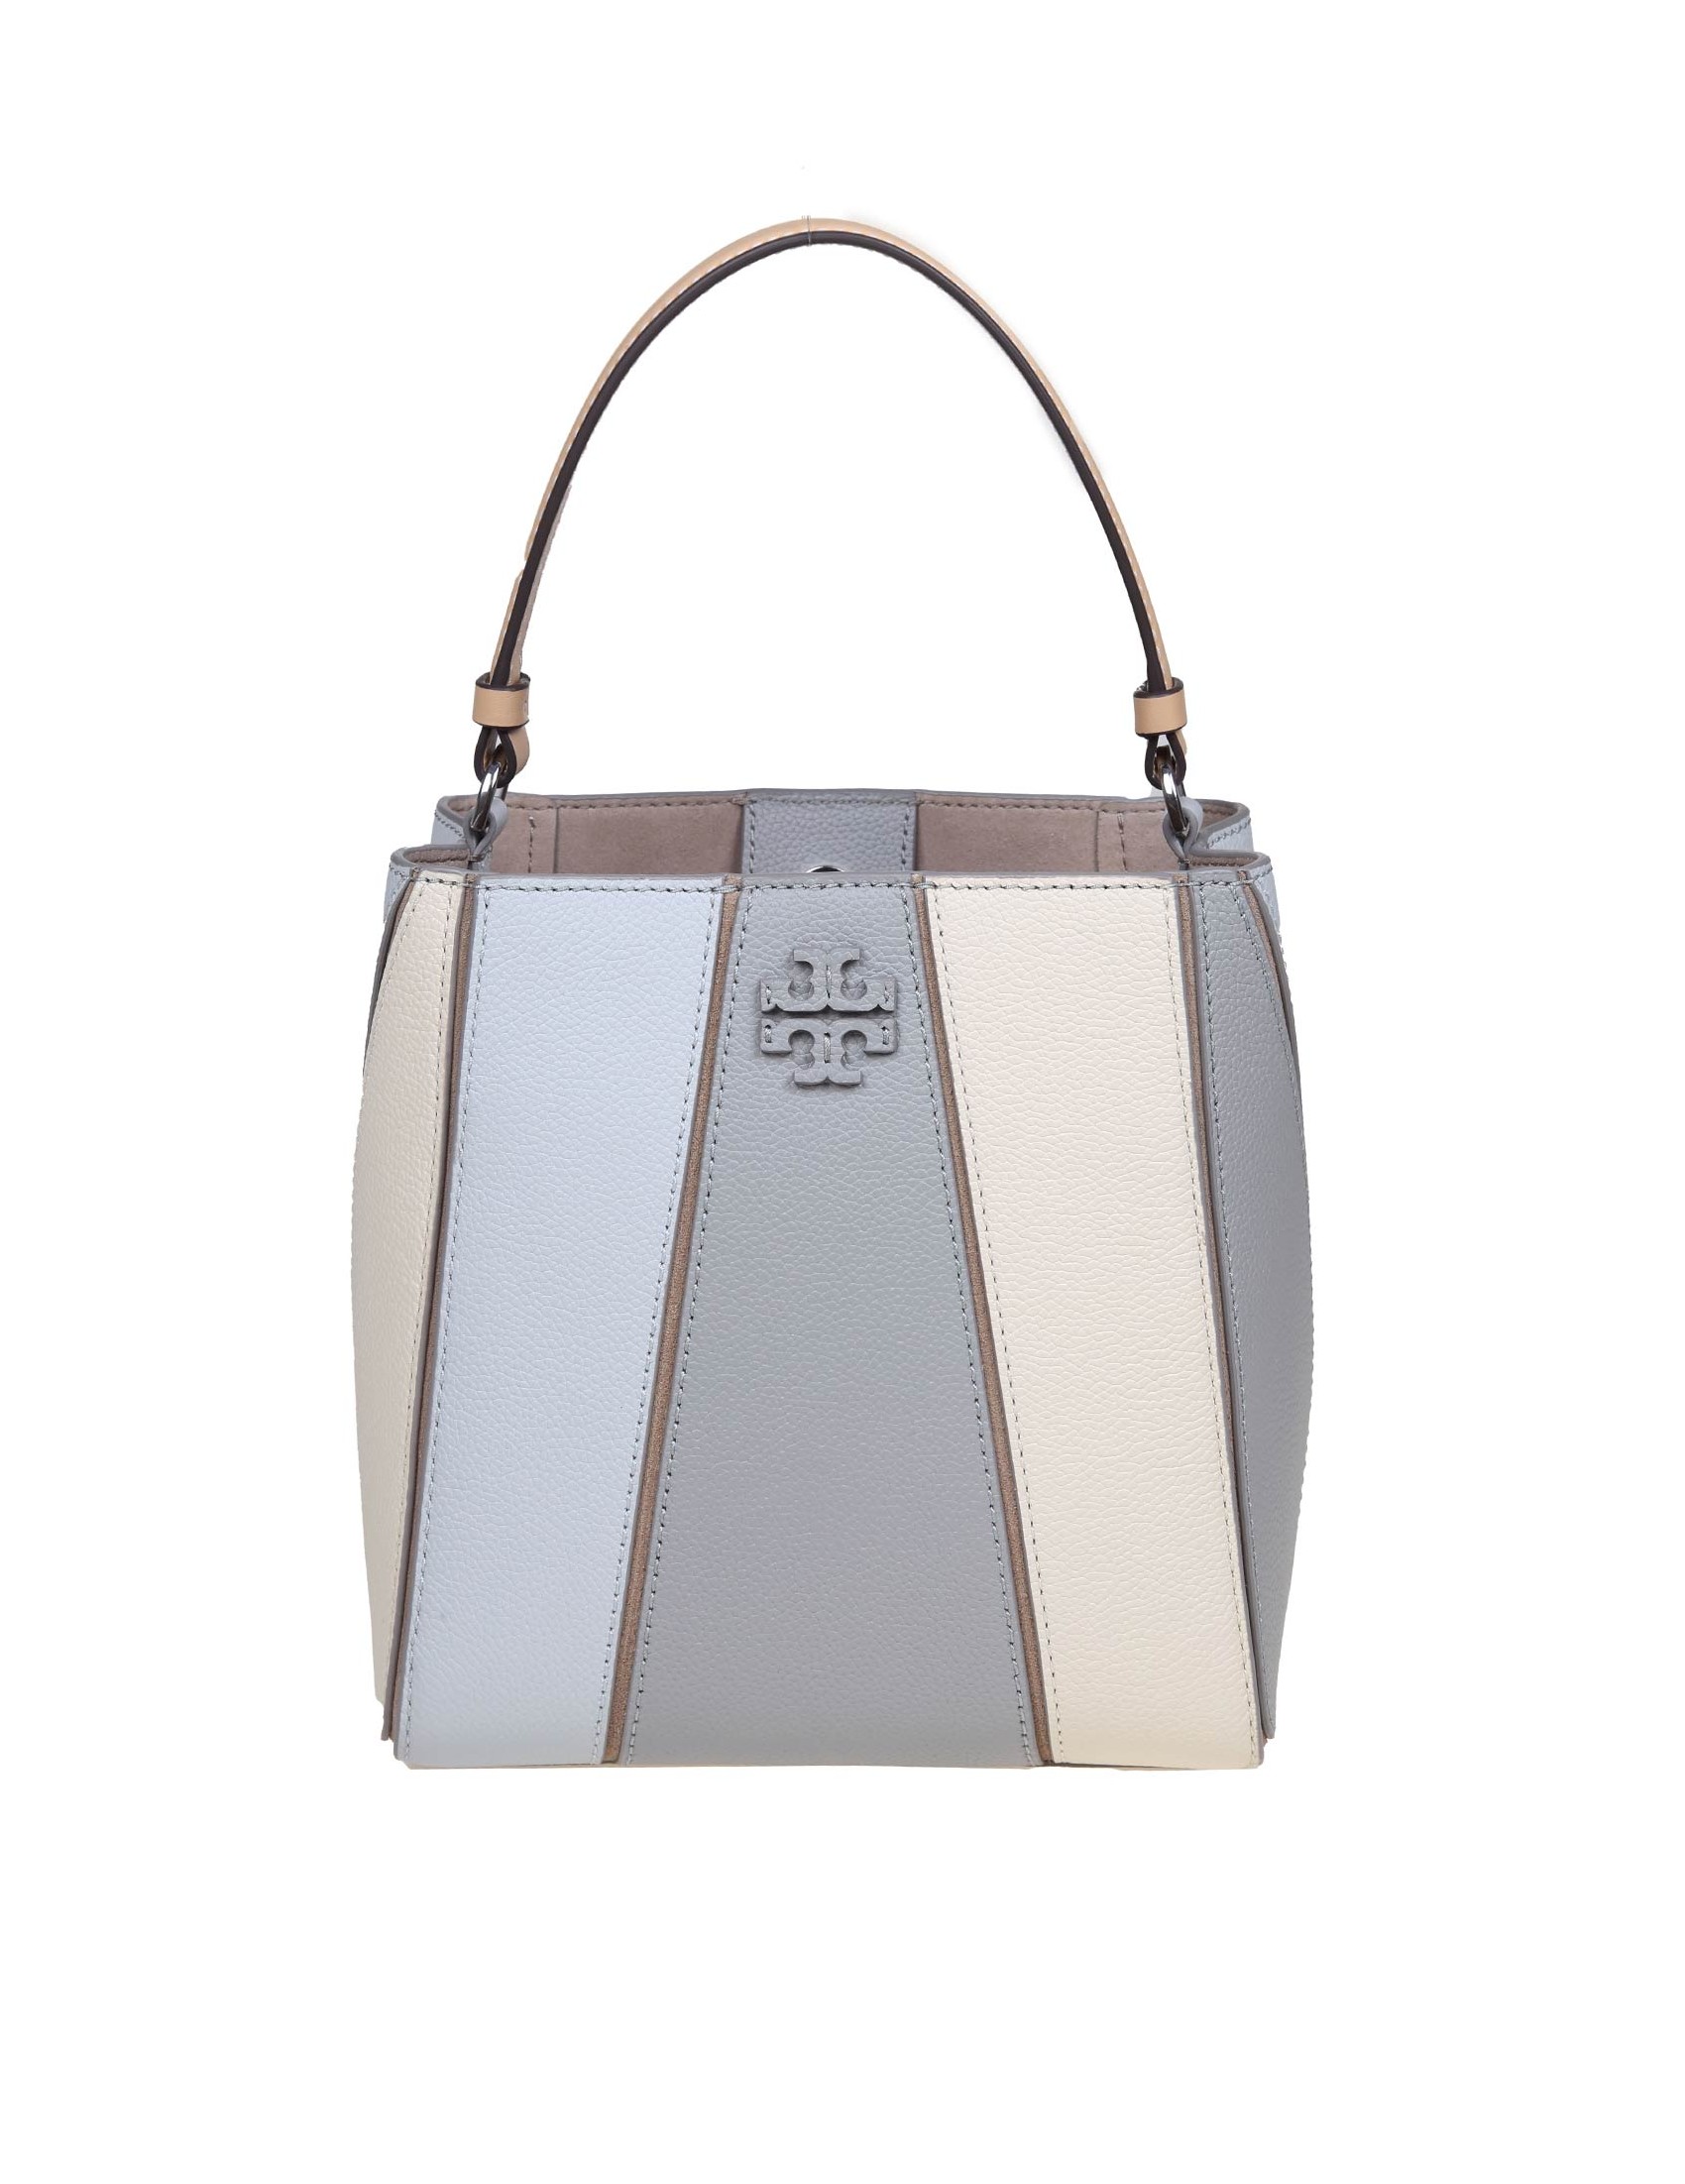 TORY BURCH MCGRAW SMALL BUCKET BAG IN MULTICOLORED LEATHER